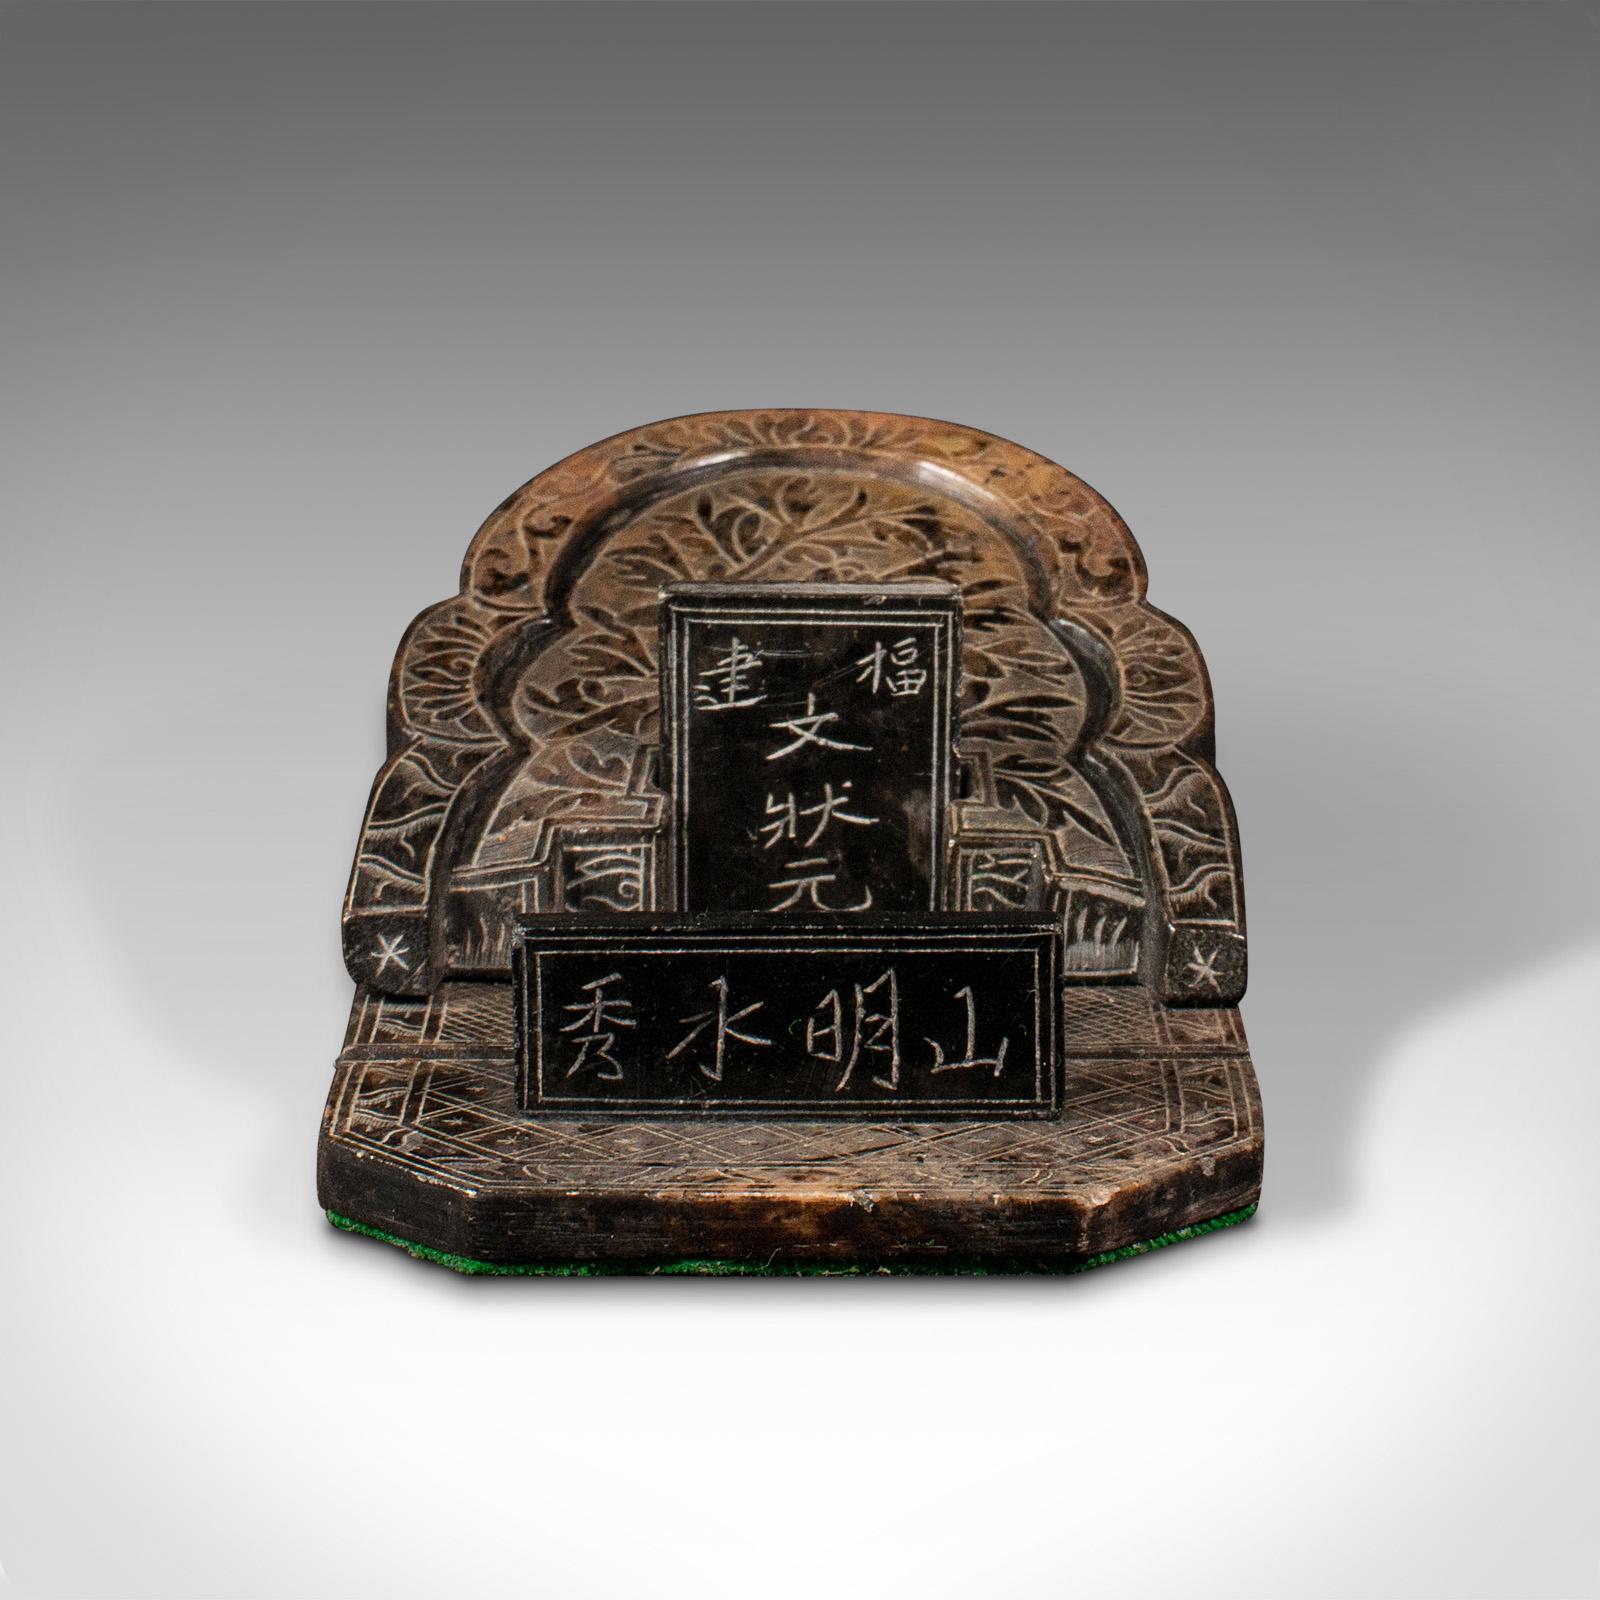 This is an antique ornamental mausoleum. A Chinese, soapstone burial memento, dating to the late Victorian period, circa 1900.

Unusual and rare decorative ornament with strong Oriental taste
Displays a desirable aged patina throughout
Carved